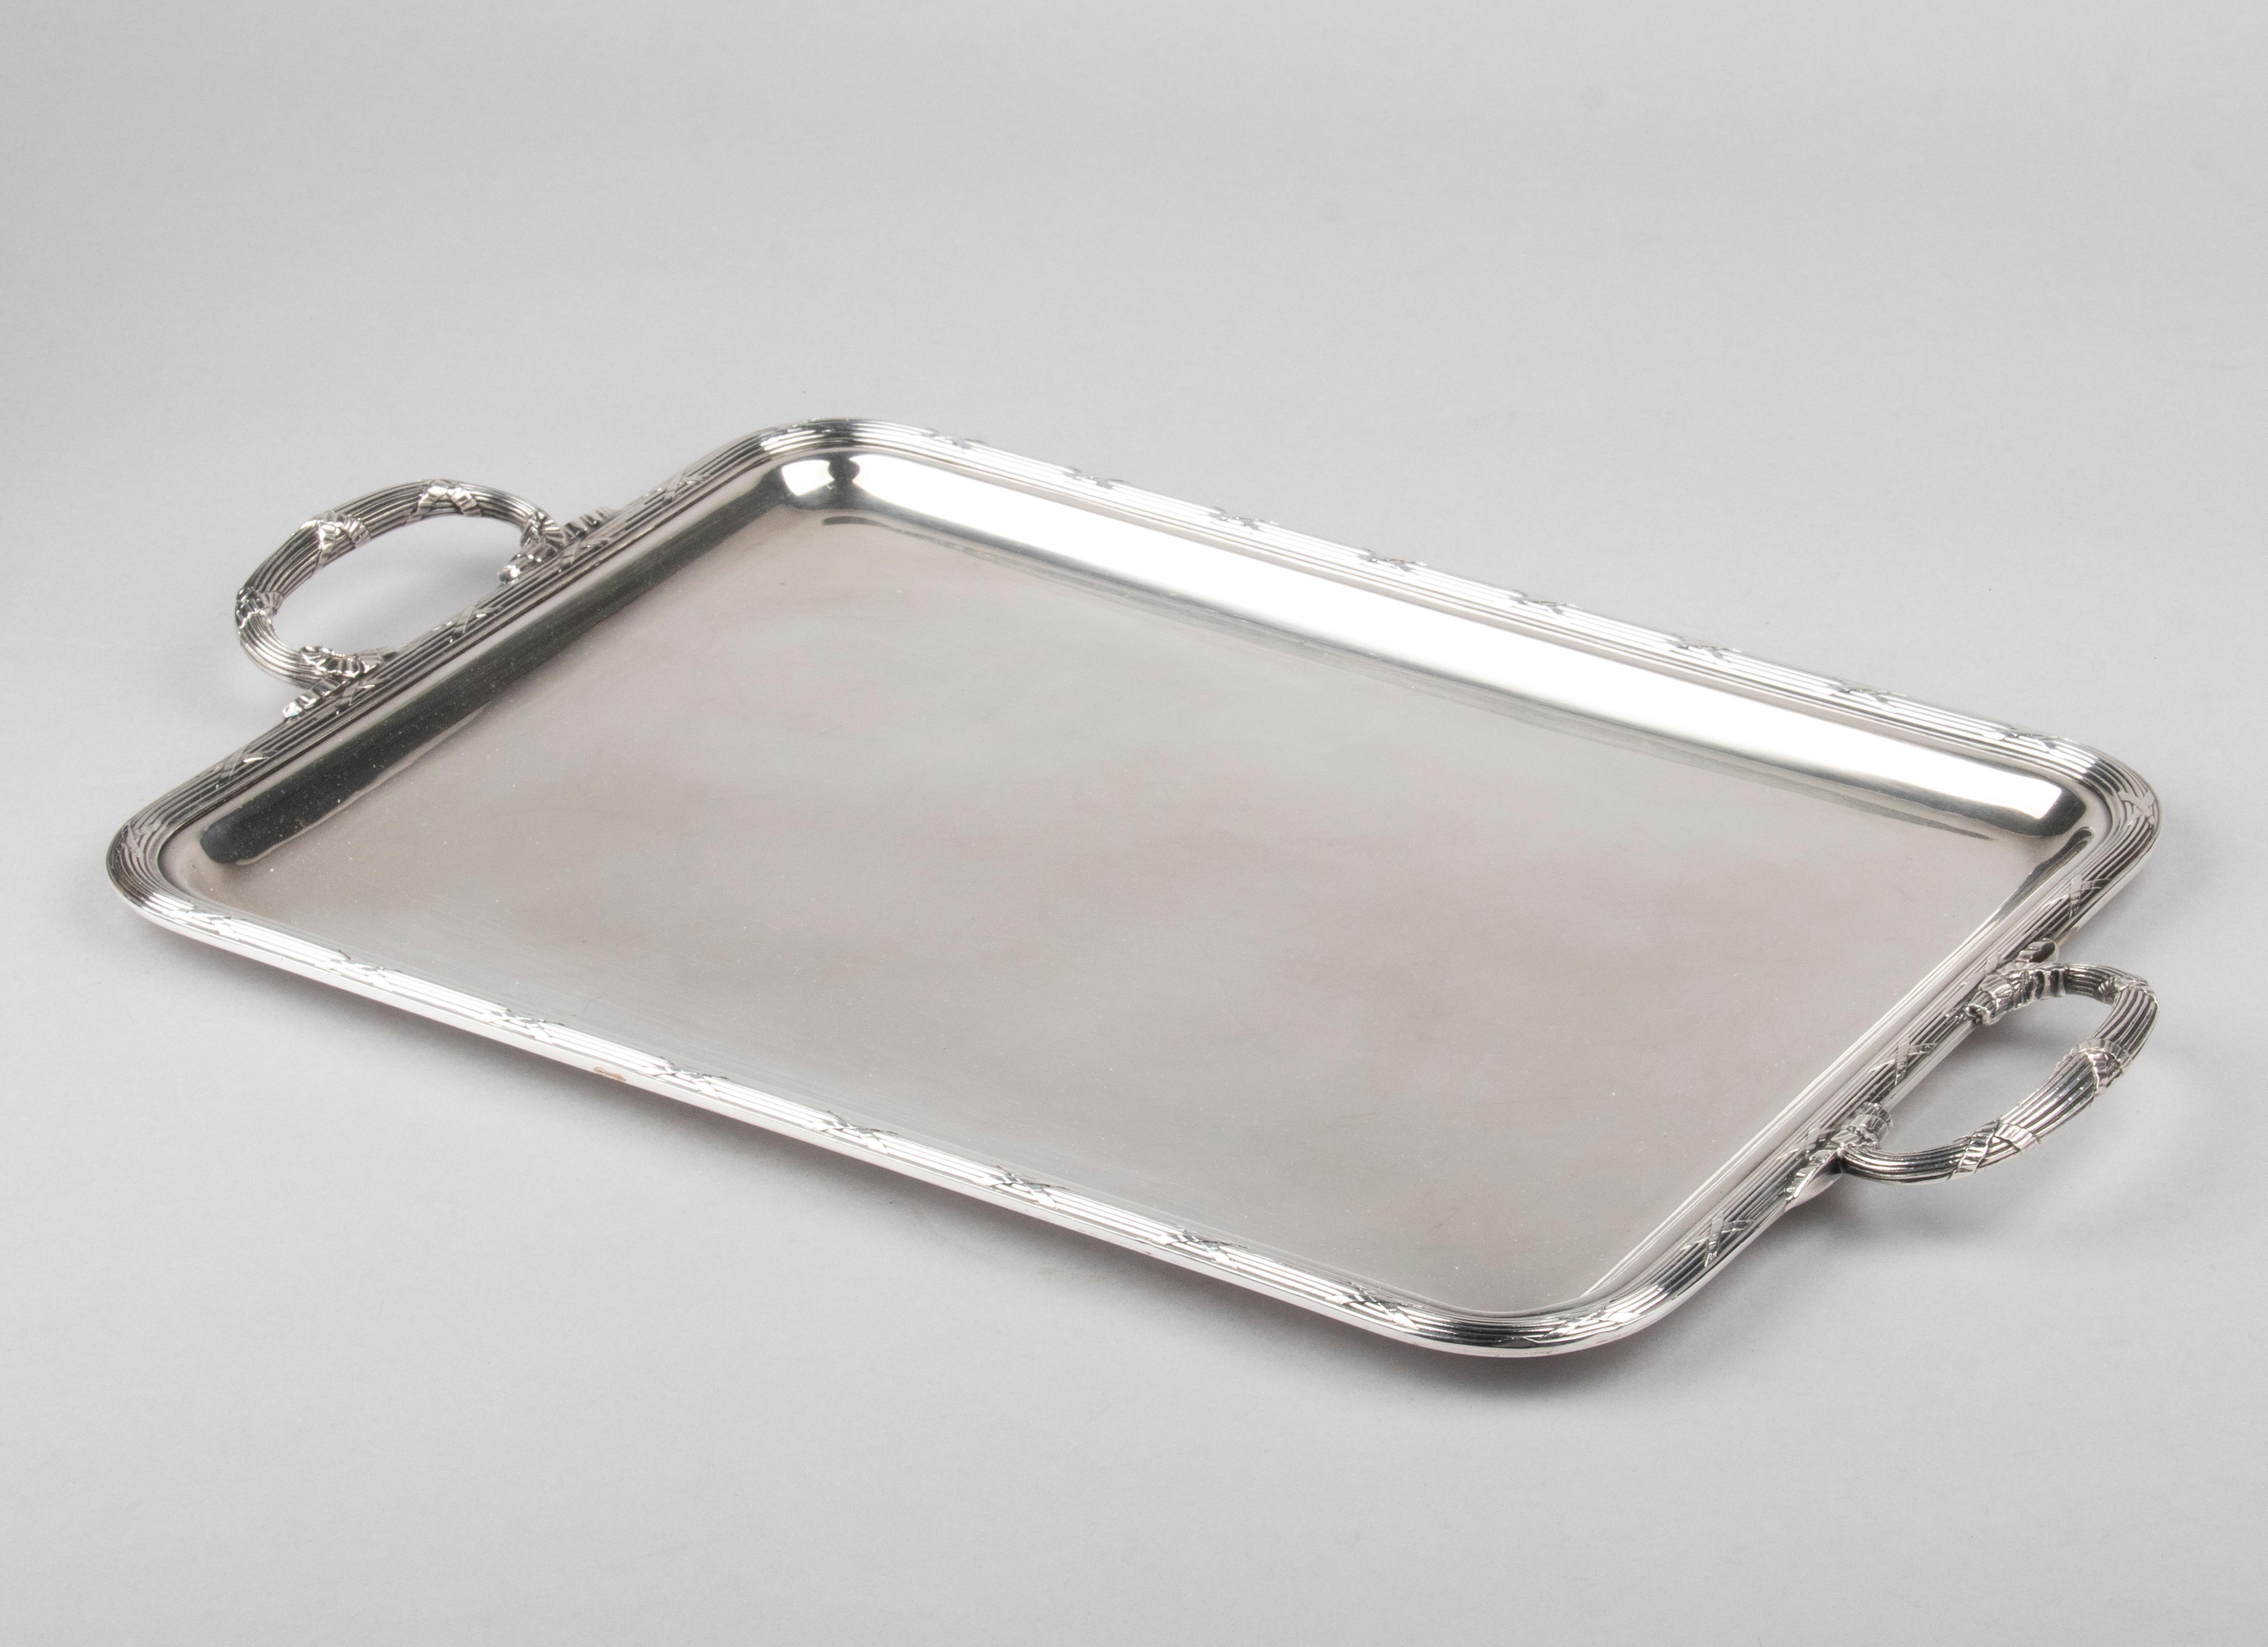 Louis XVI Mid-Century Modern Silver Plated Serving Tray Made by Christofle France